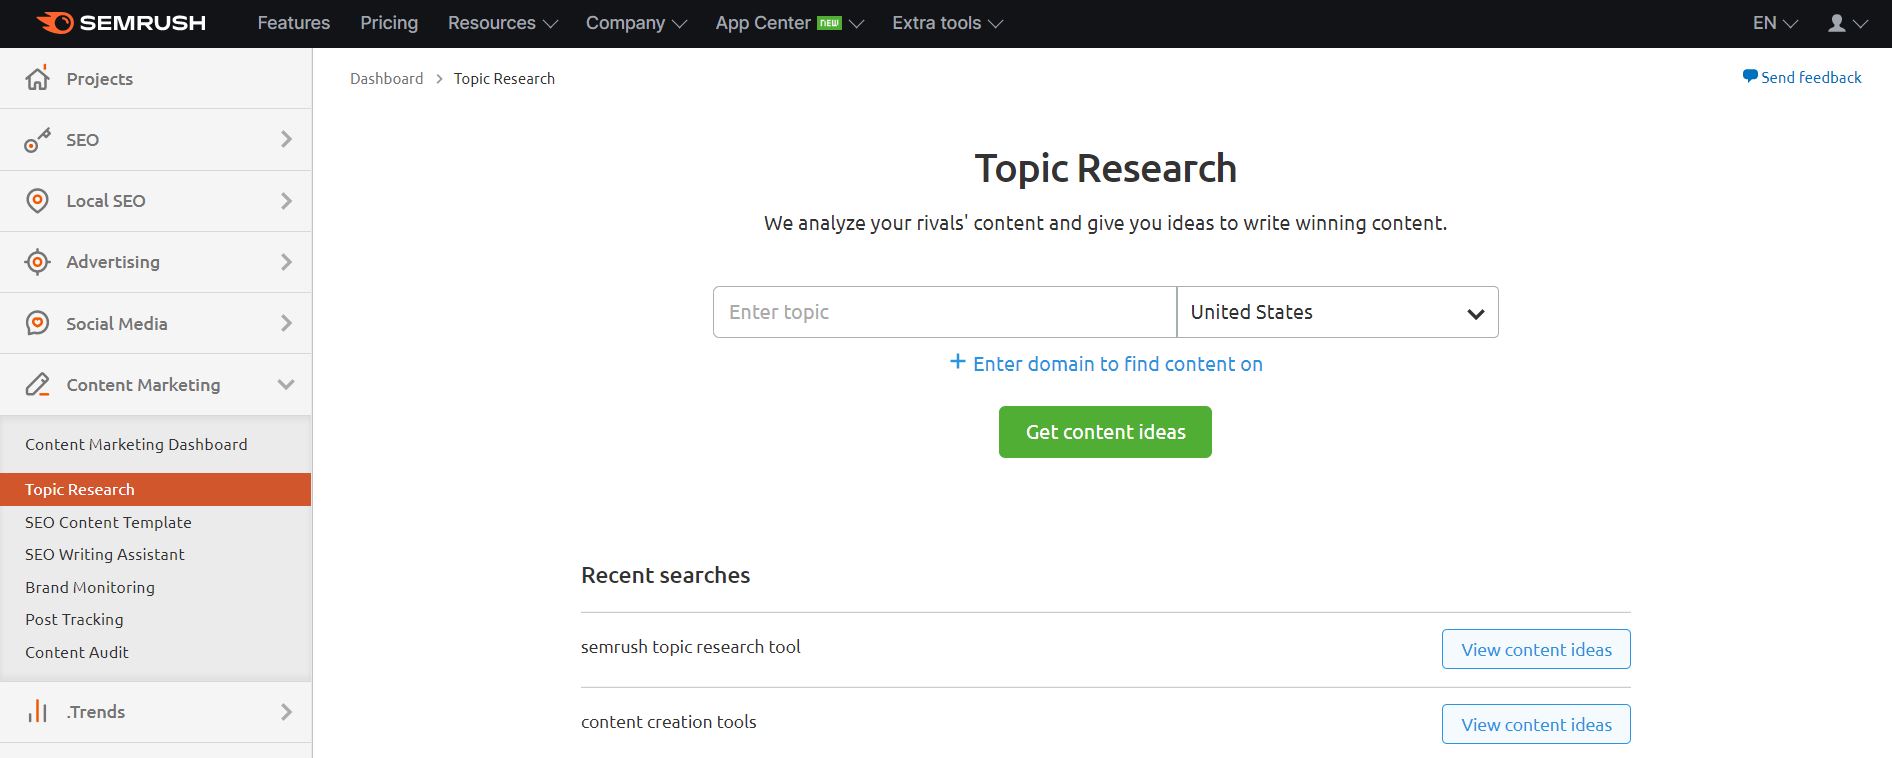 semrush topic research tool for content creation